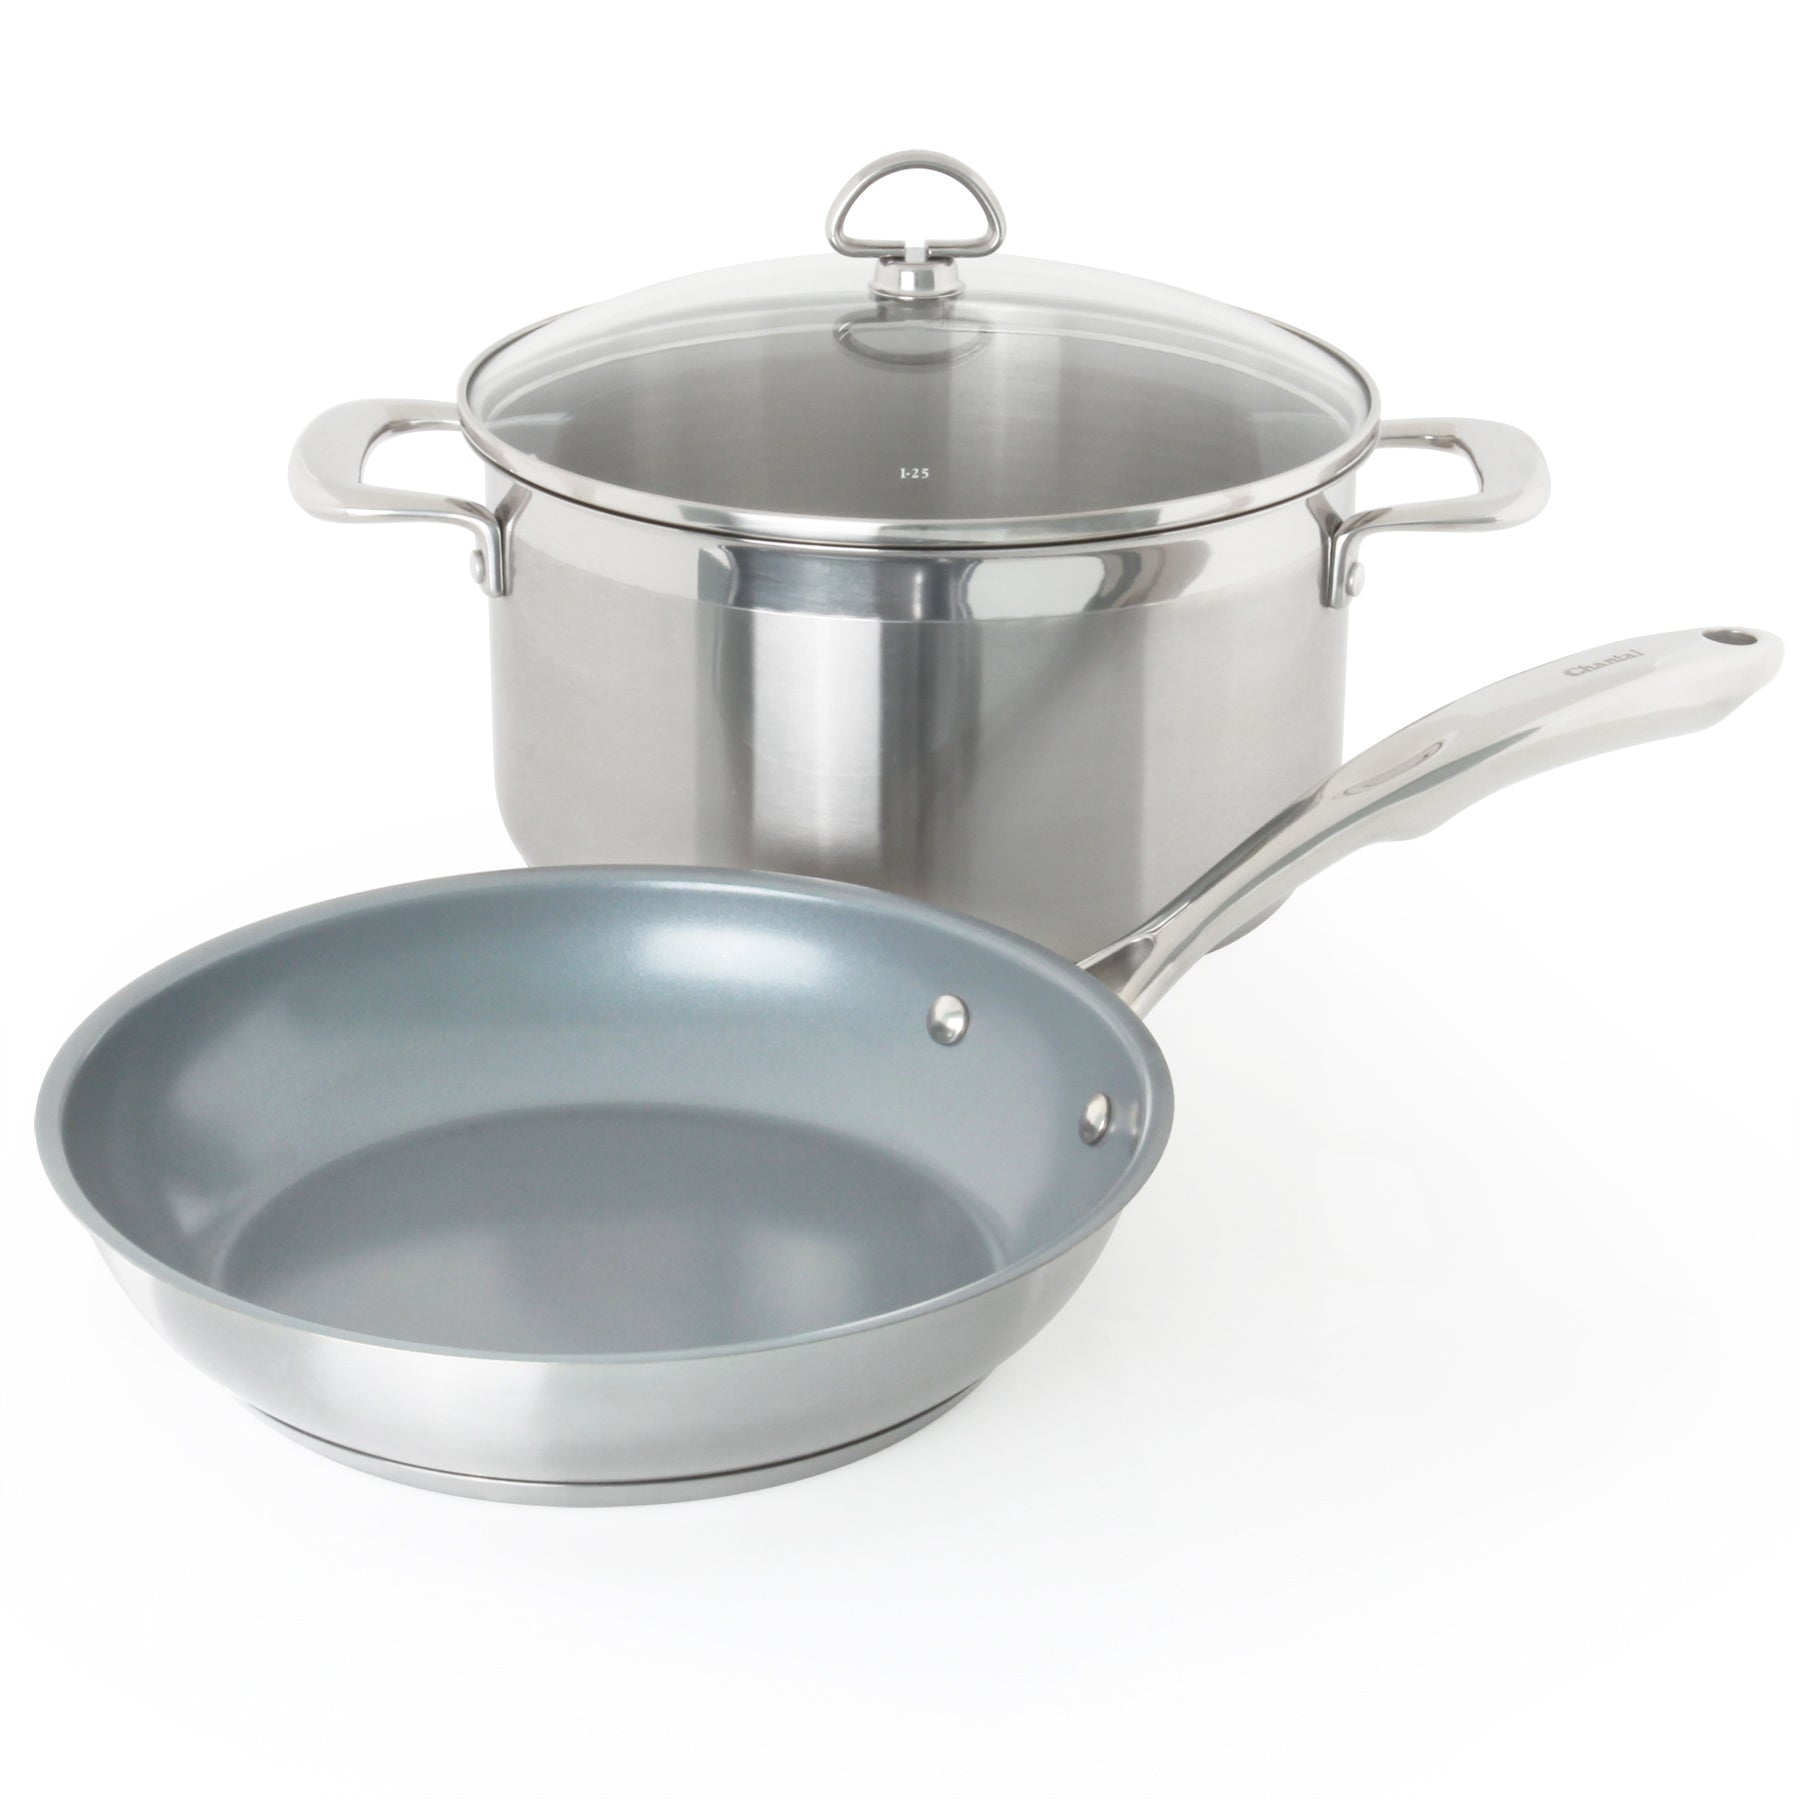 Chantal Induction 21 7 piece Stainless Steel Cookware